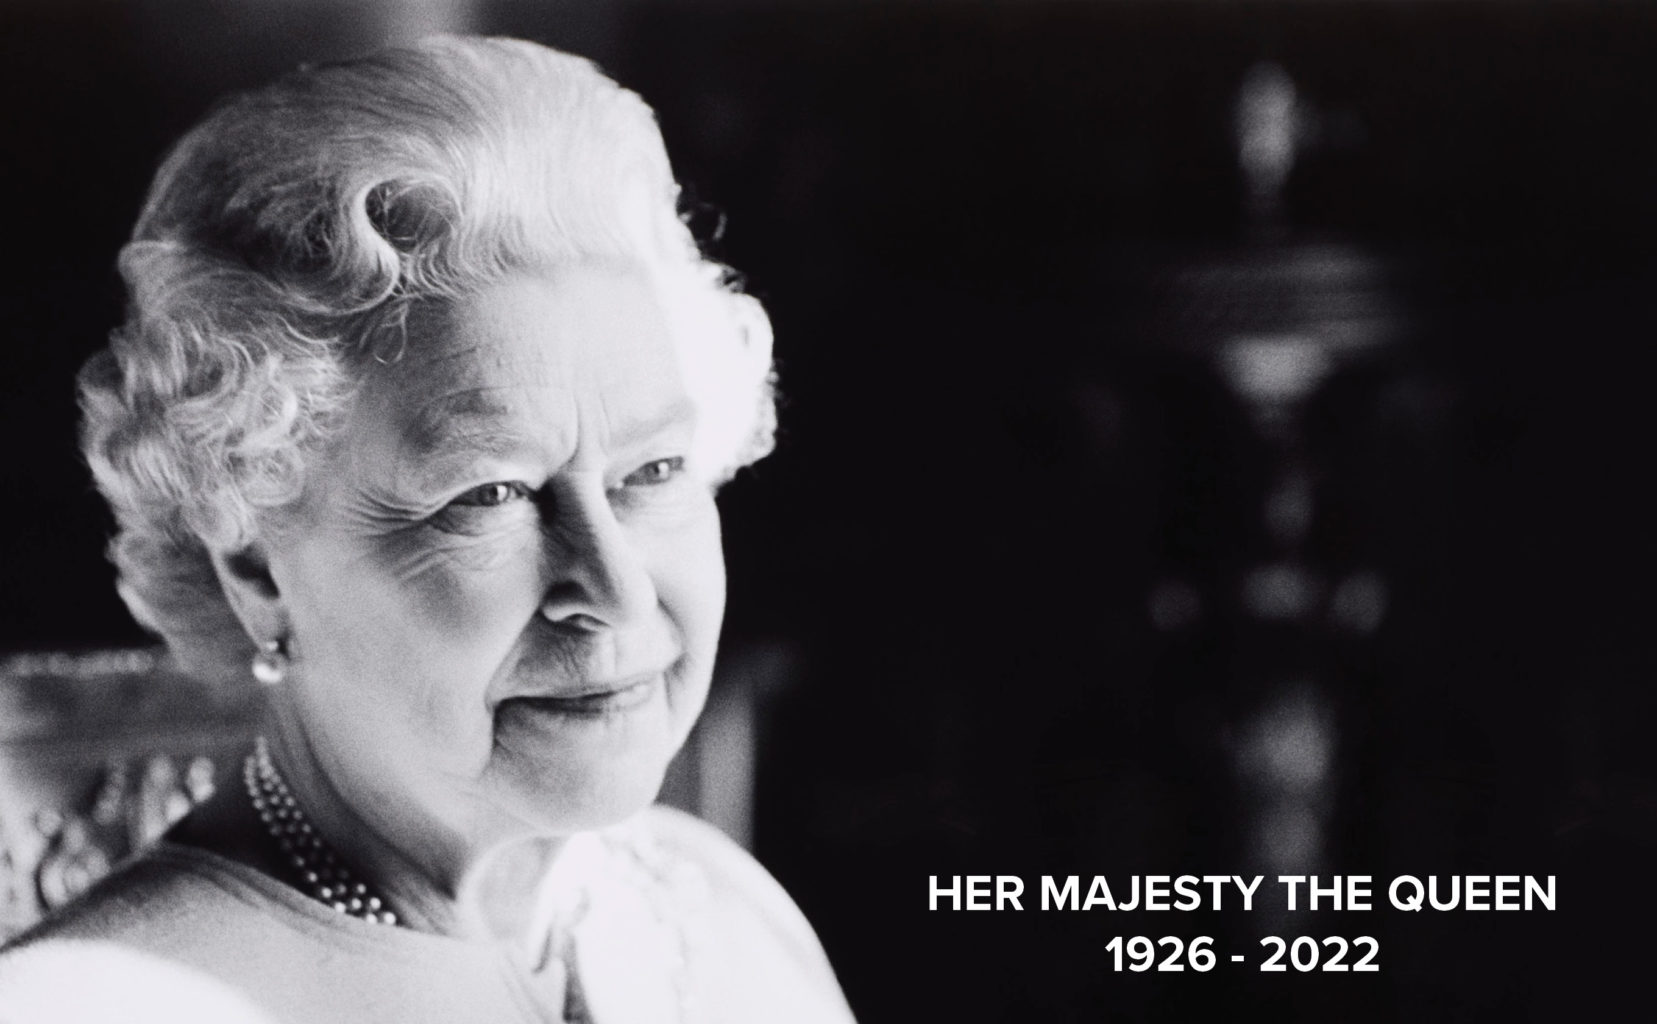 NDTG joins nation in mourning the passing of Queen Elizabeth II